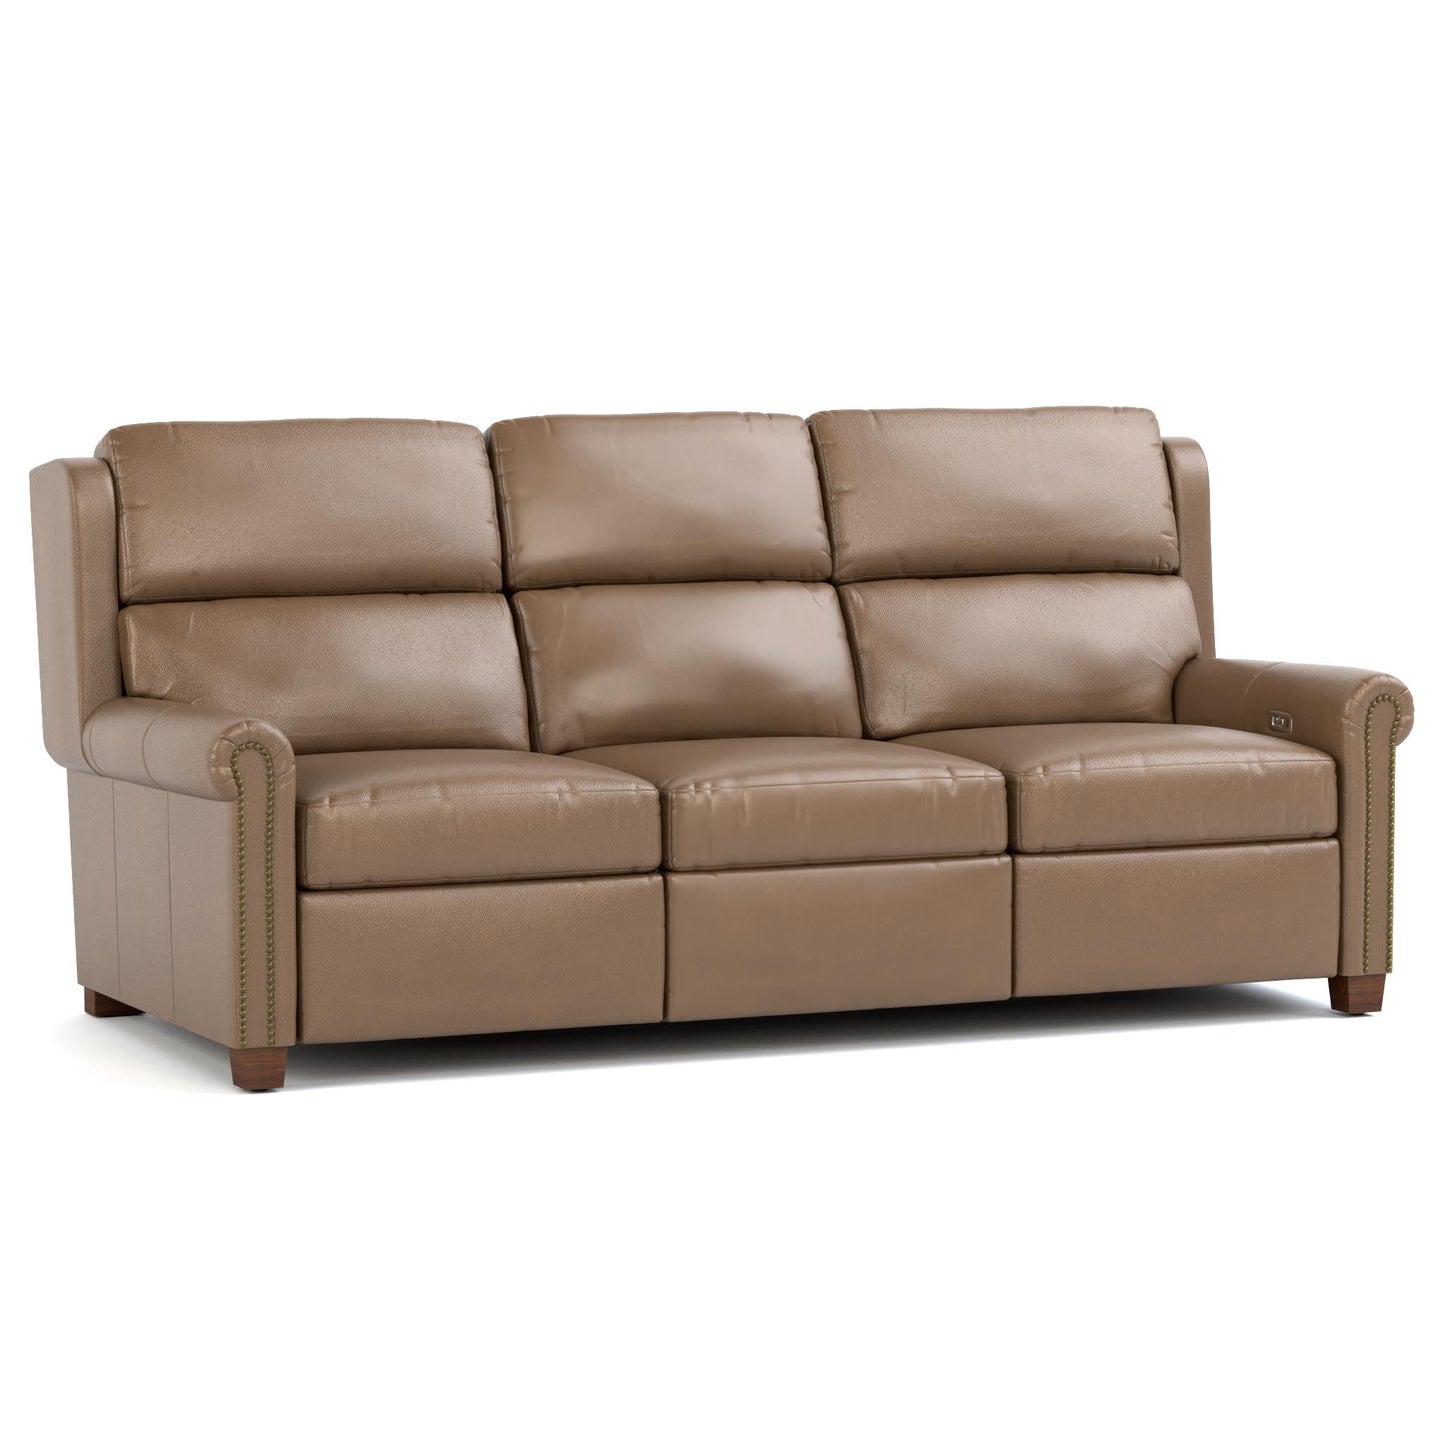 Woodlands Small Roll Arm Motion Loveseat with Nails